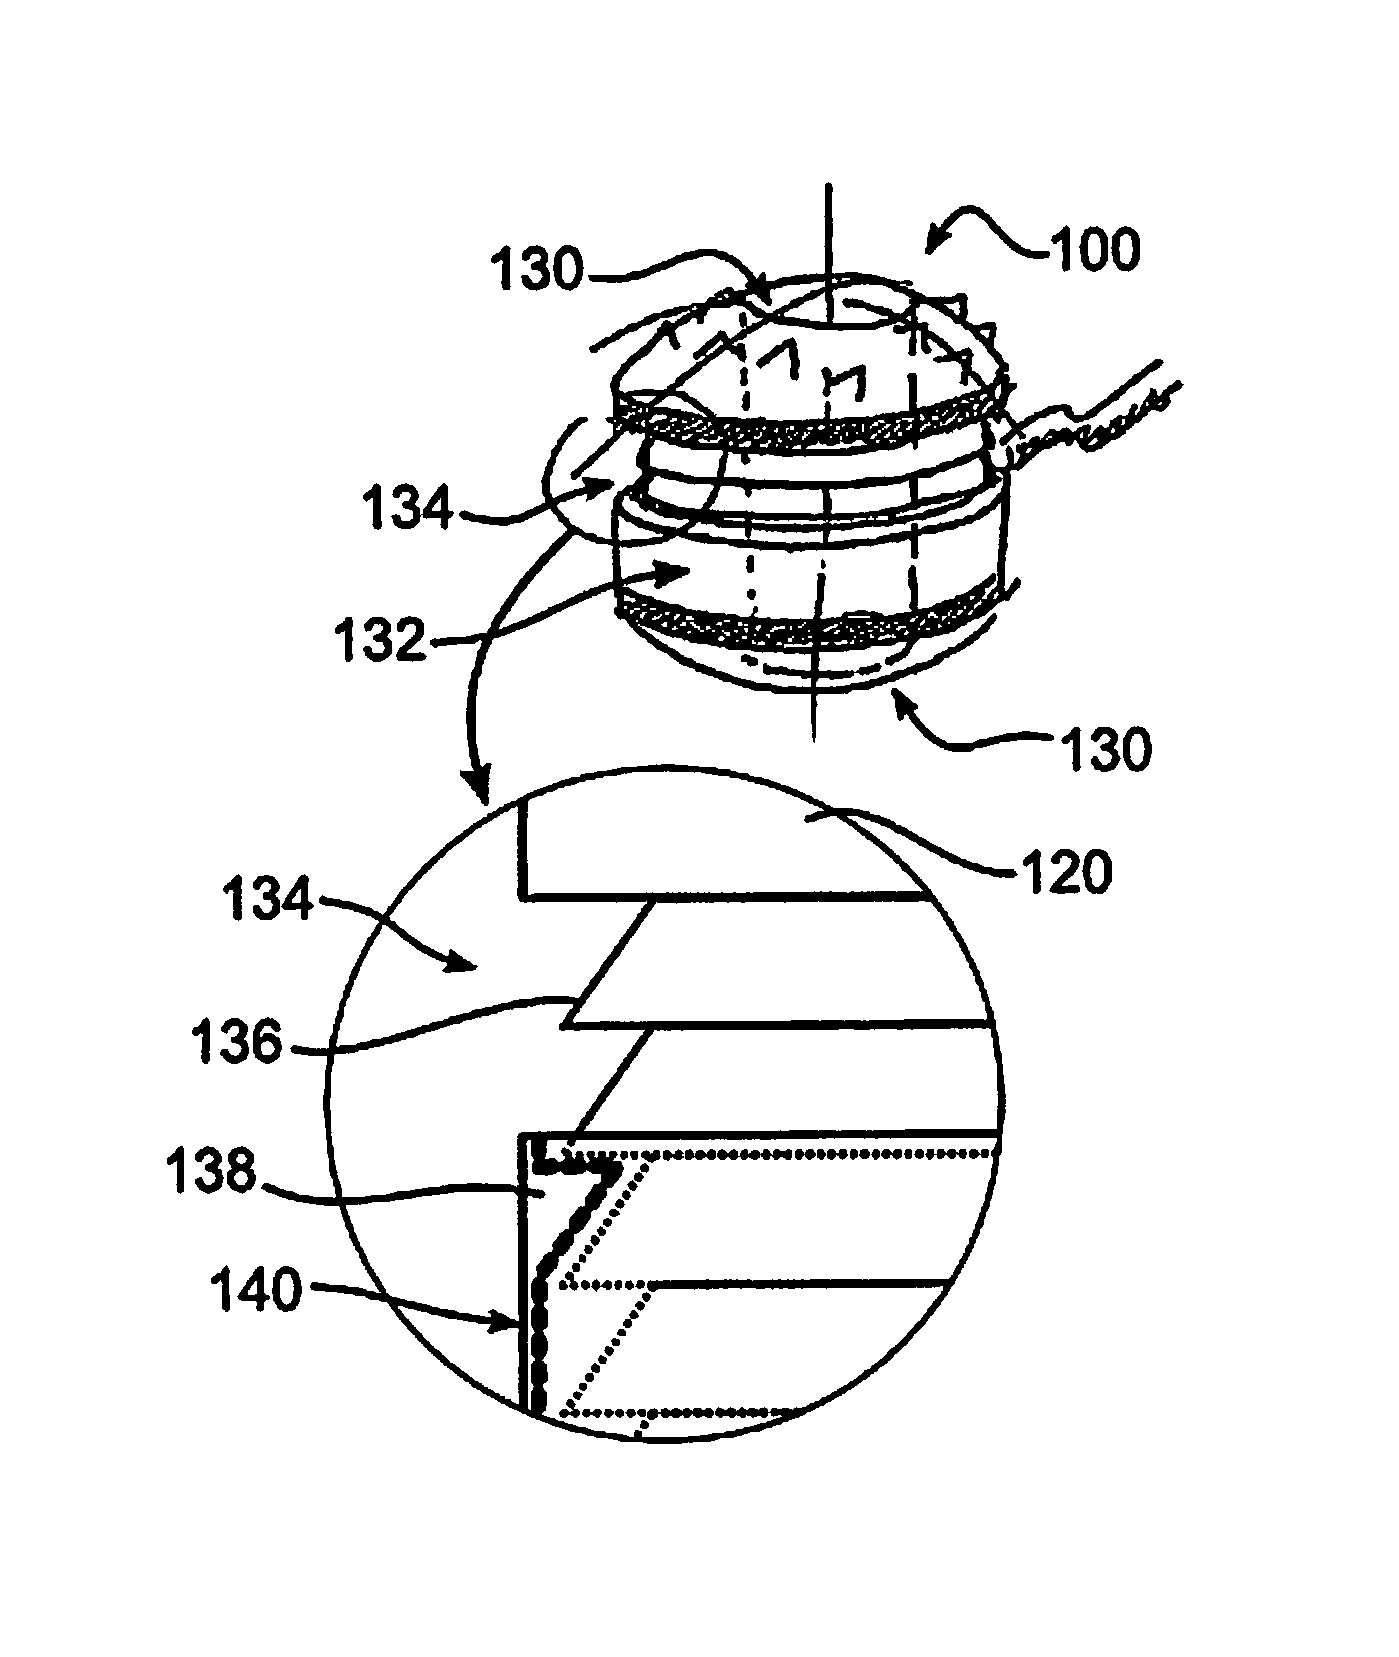 Stabilizing vertebrae with expandable spacers